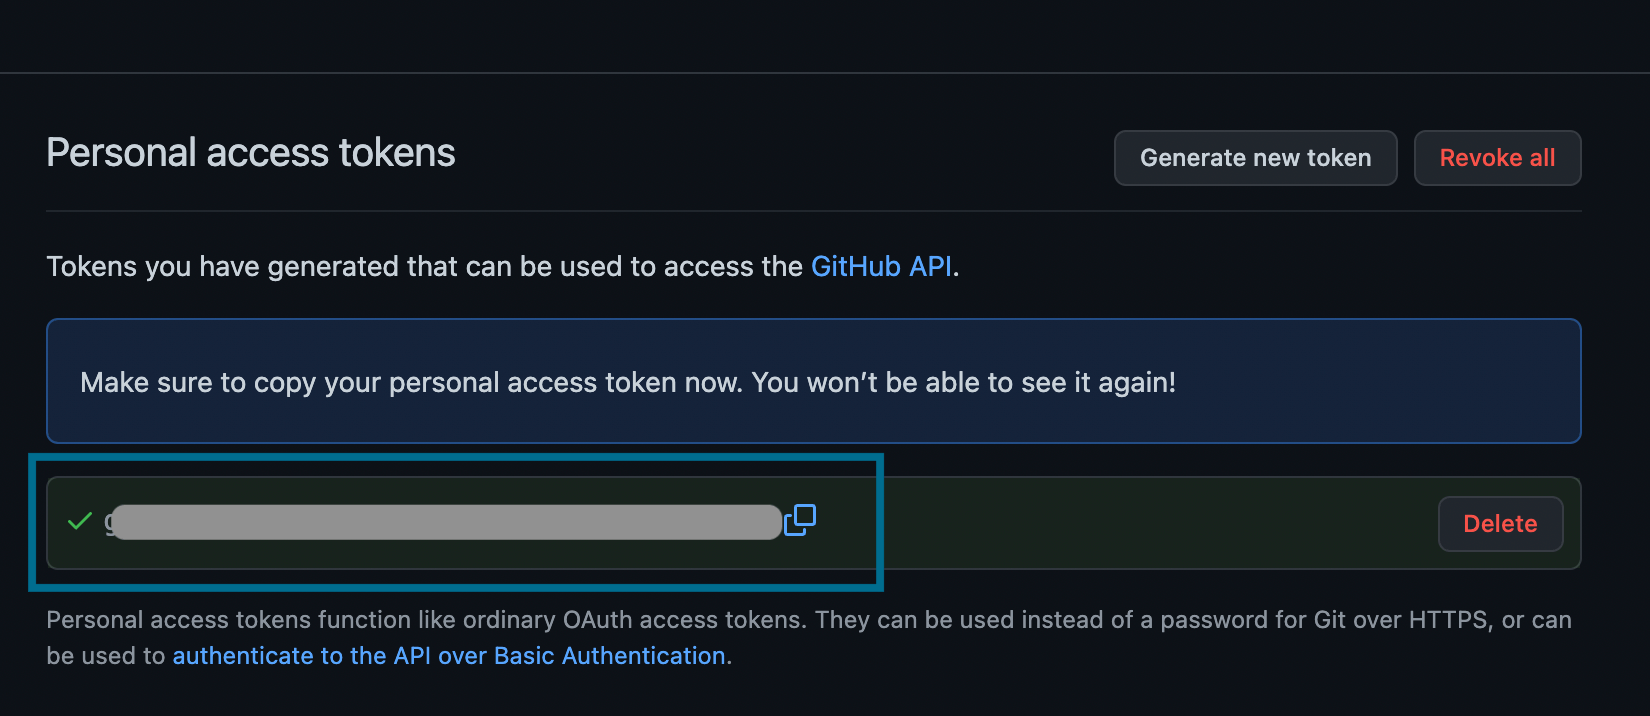 GitHubでPersonal access tokensを発行する手順